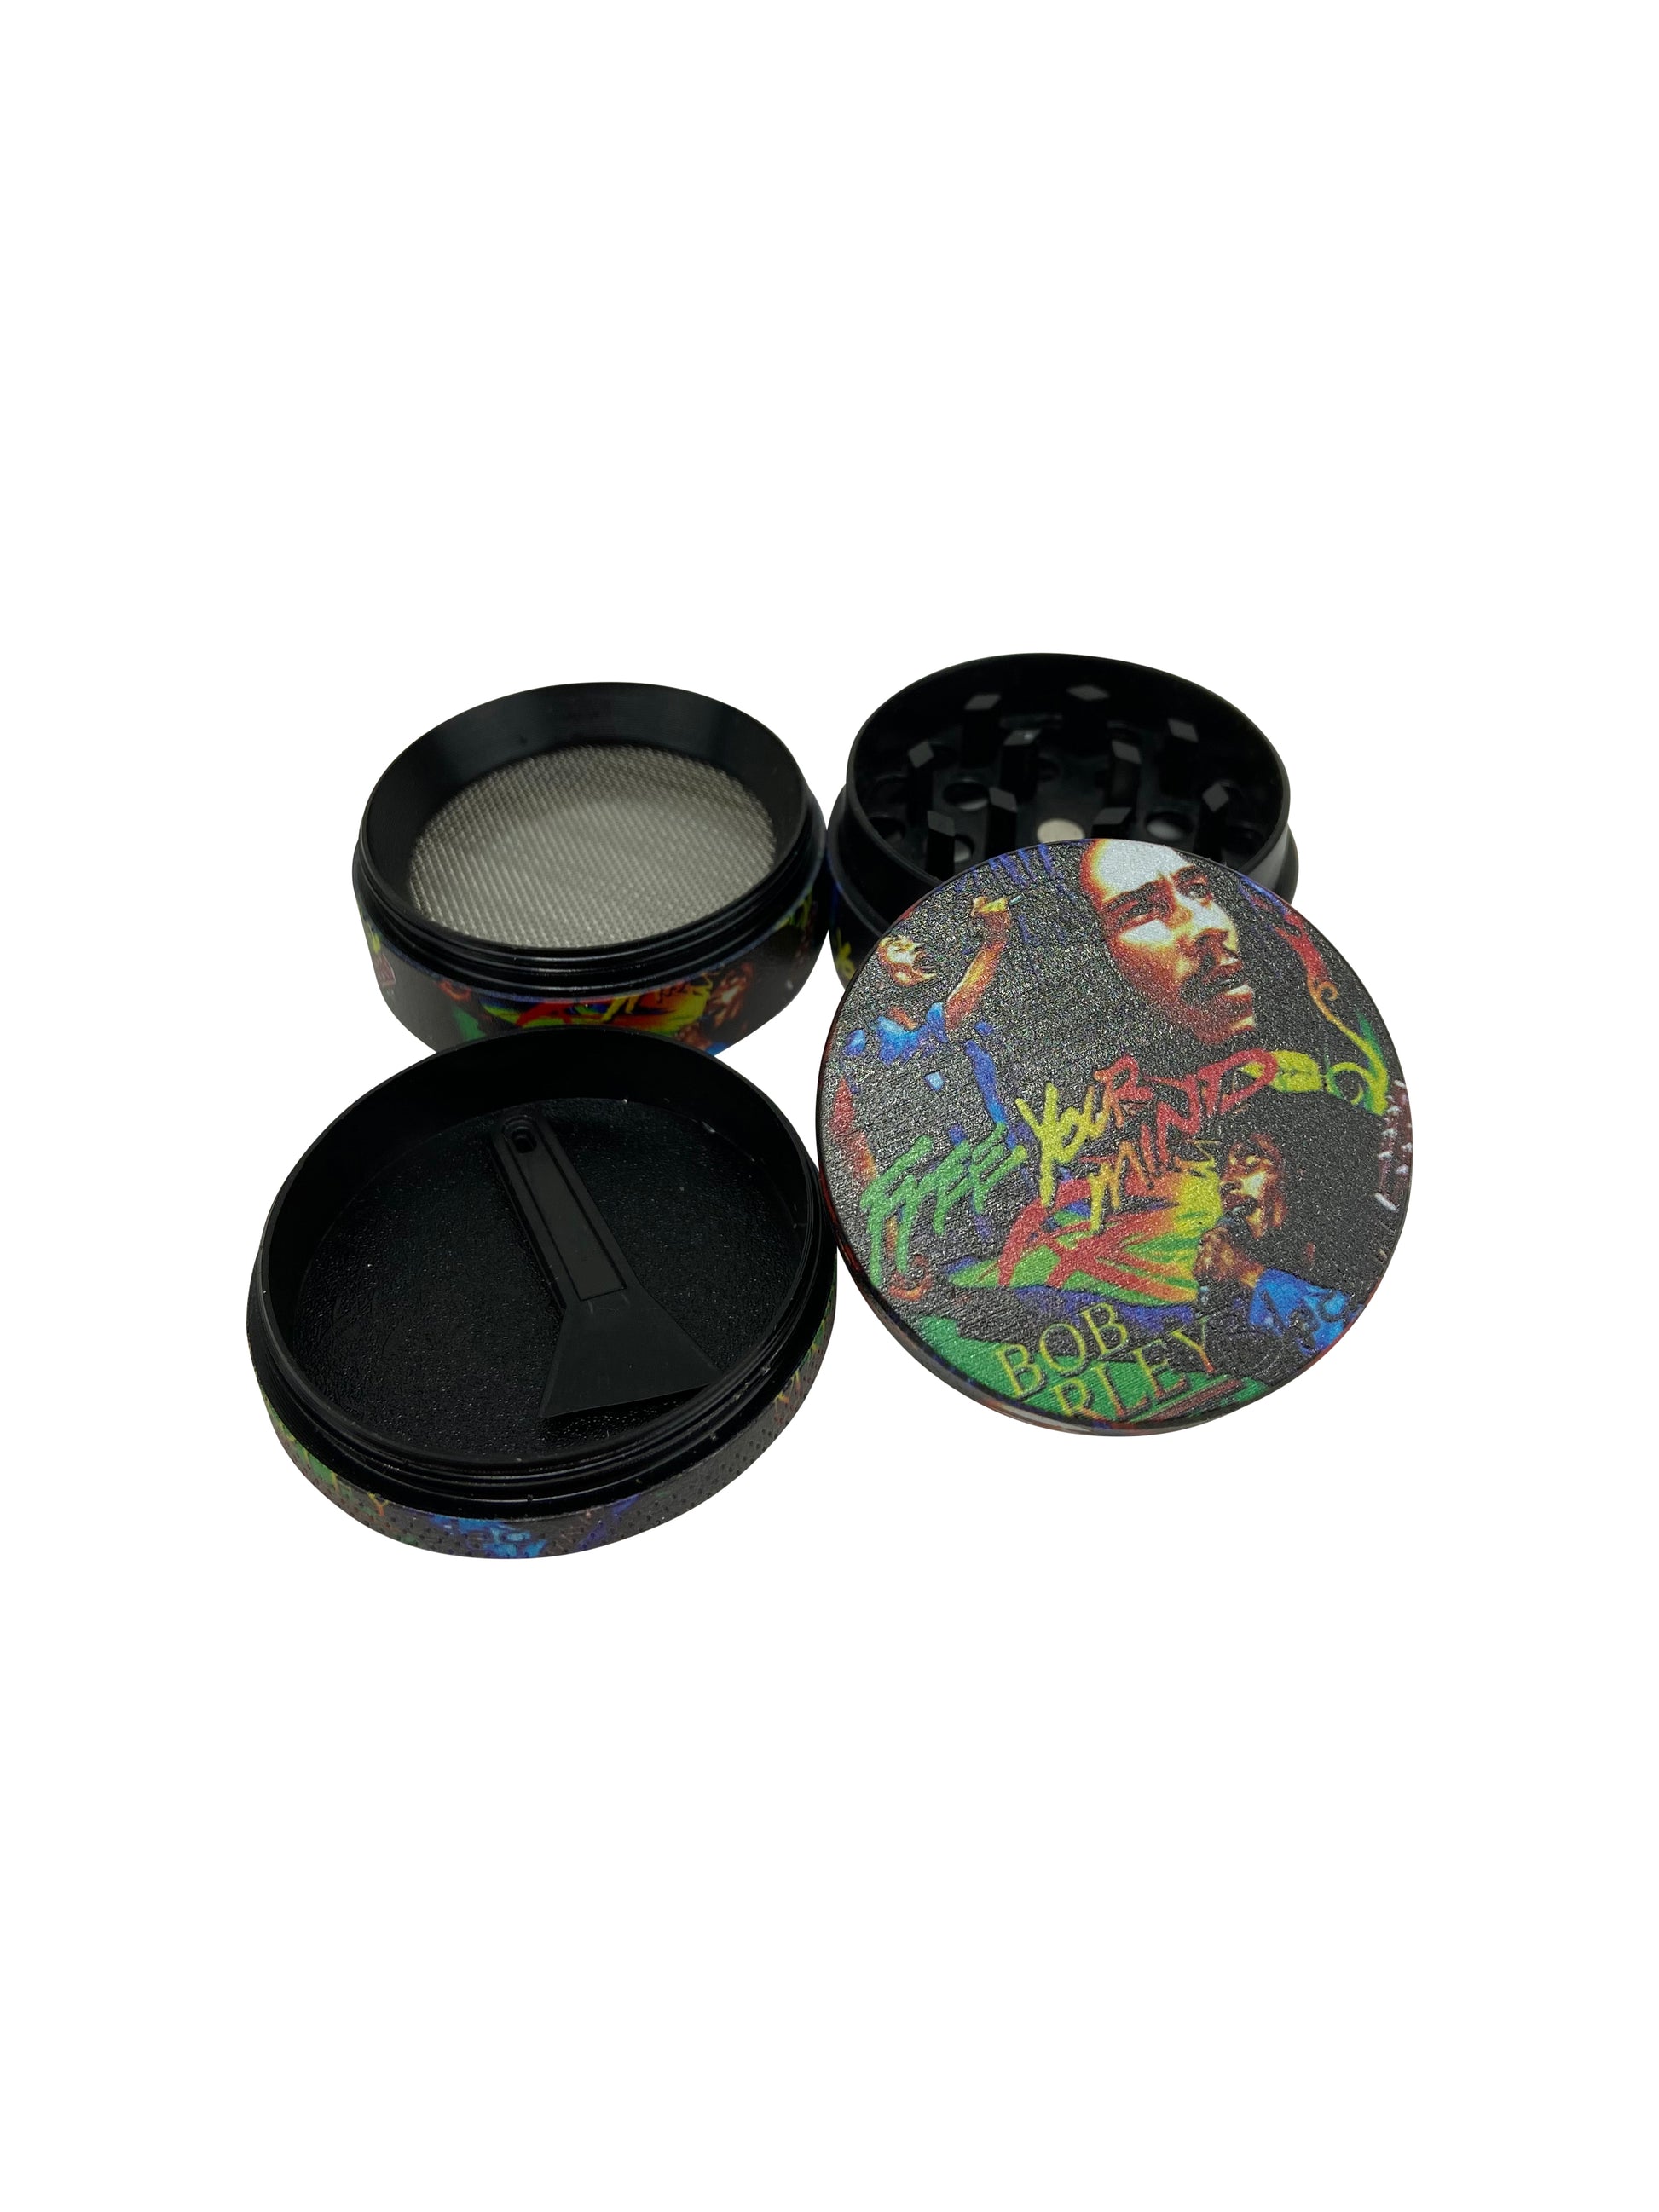 Small Herb Grinder With Bob Marley Design